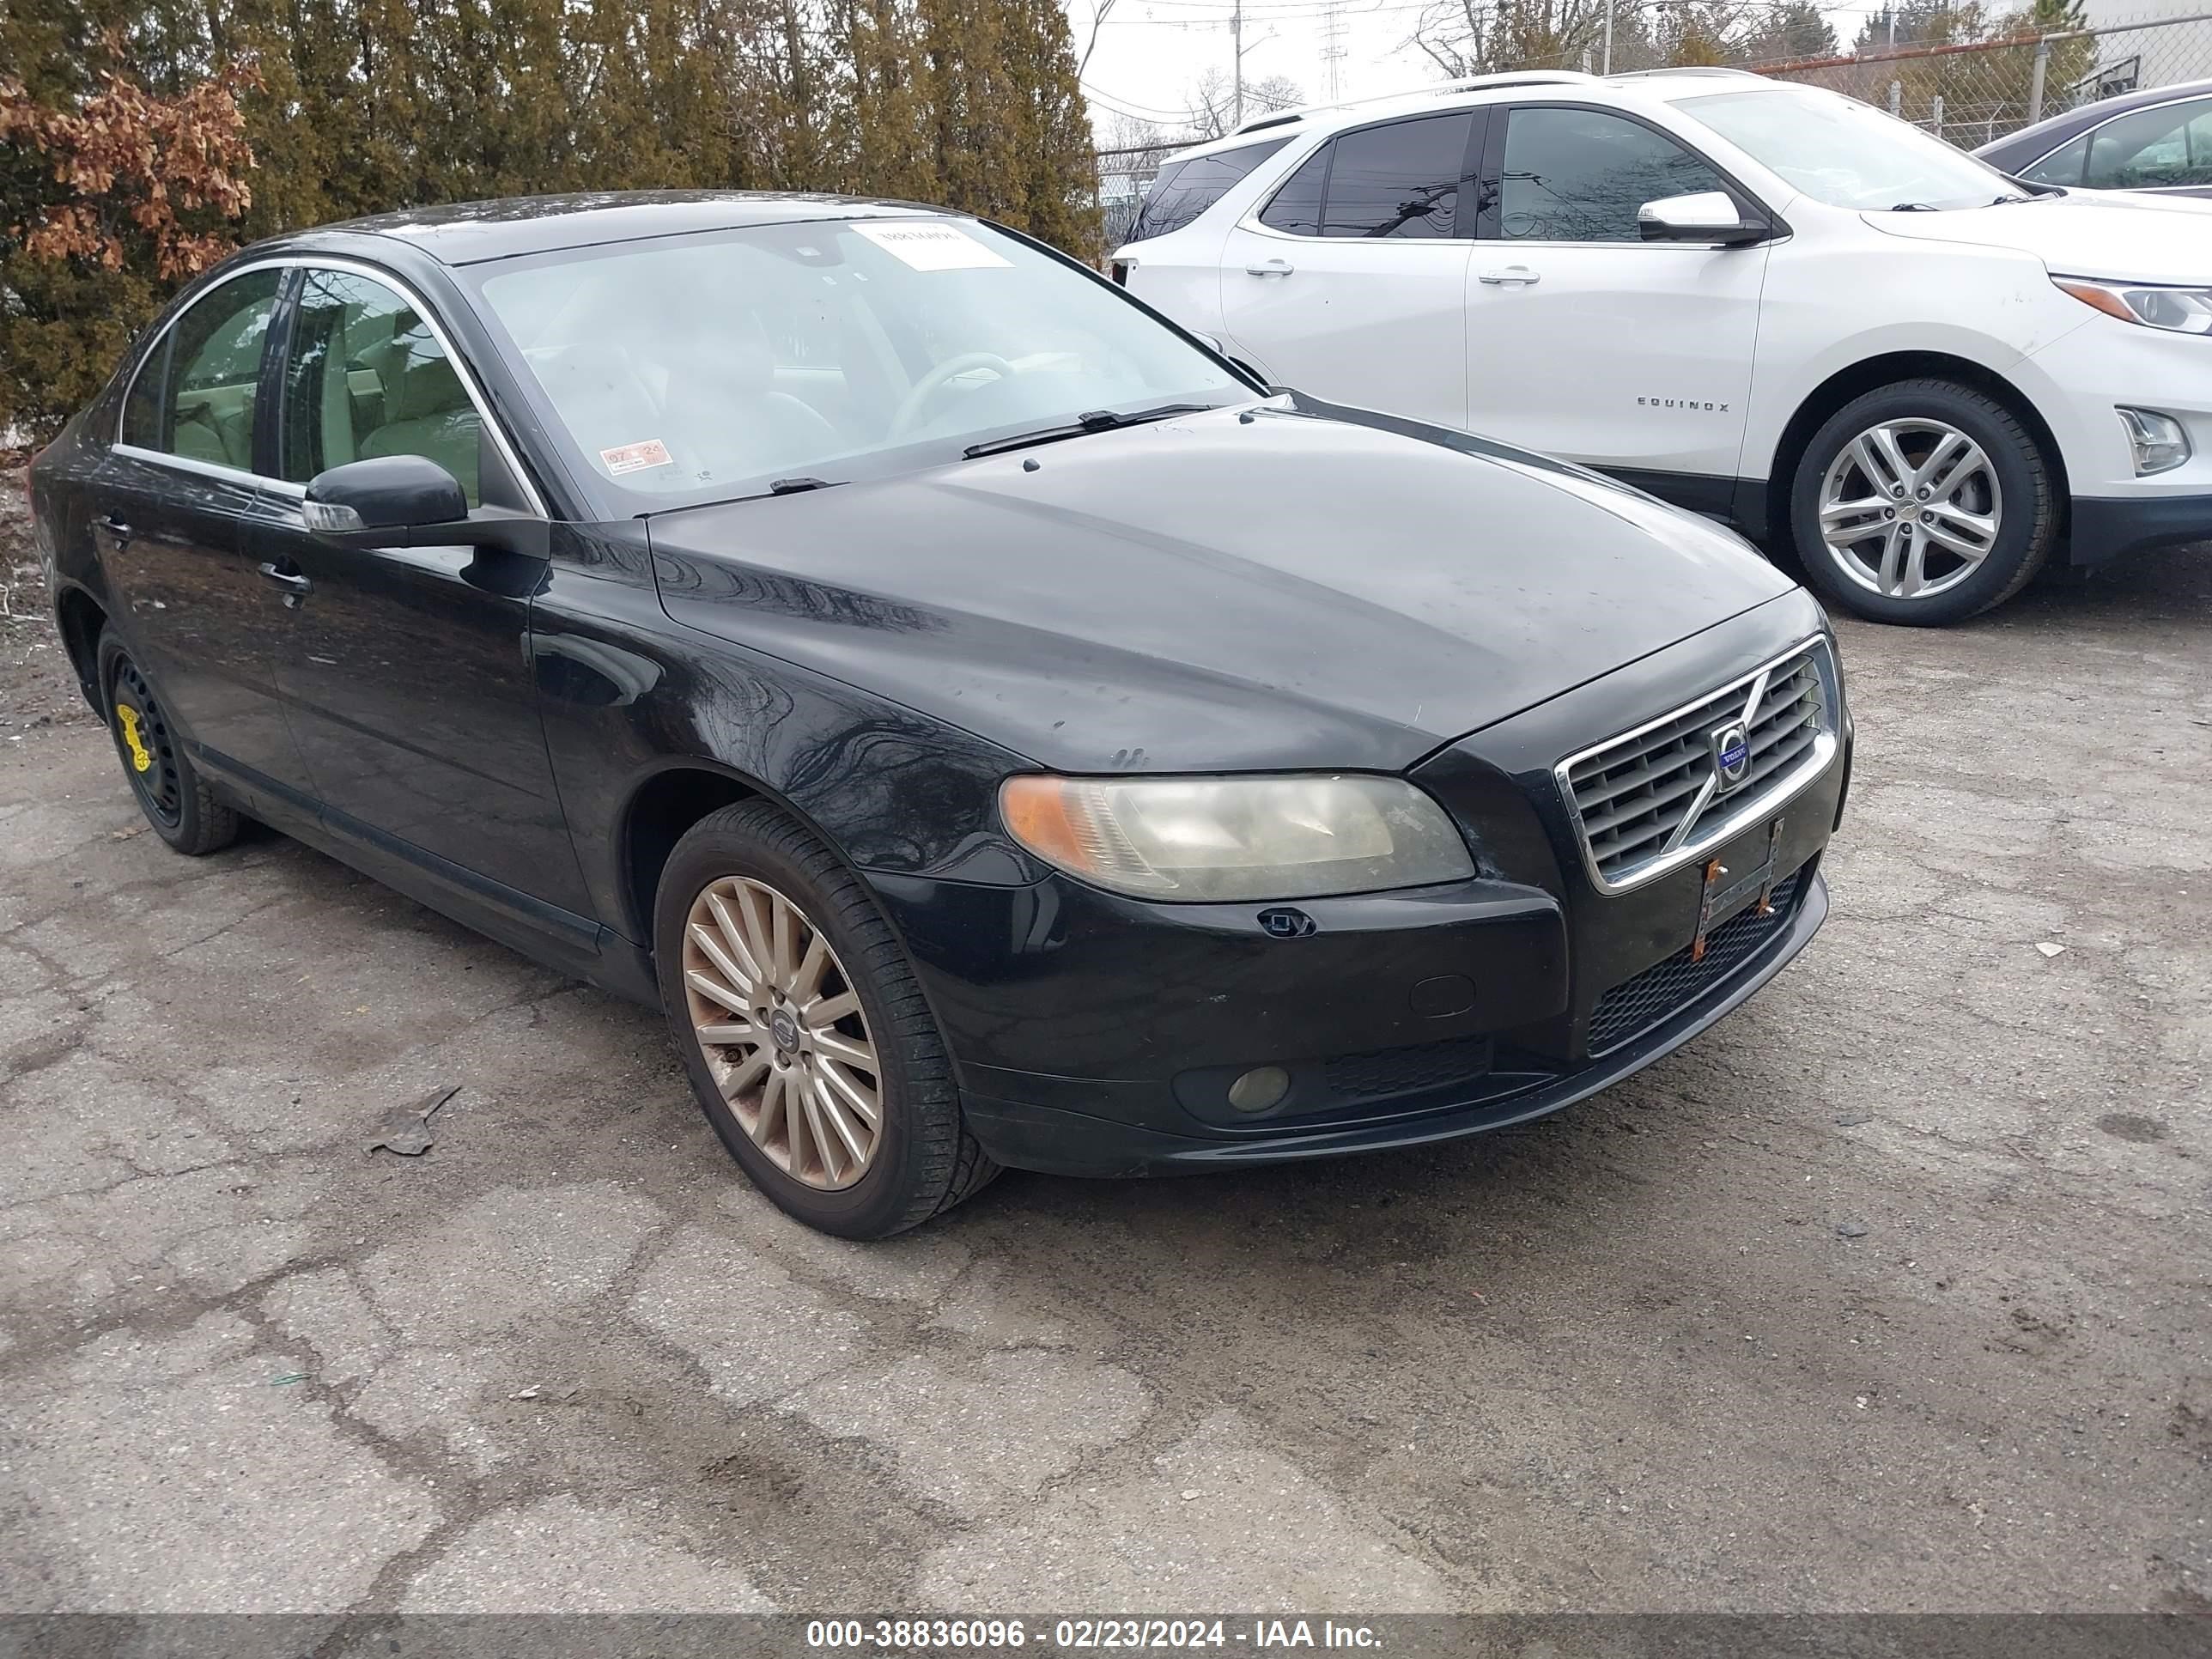 volvo s80 2007 yv1as982471021151